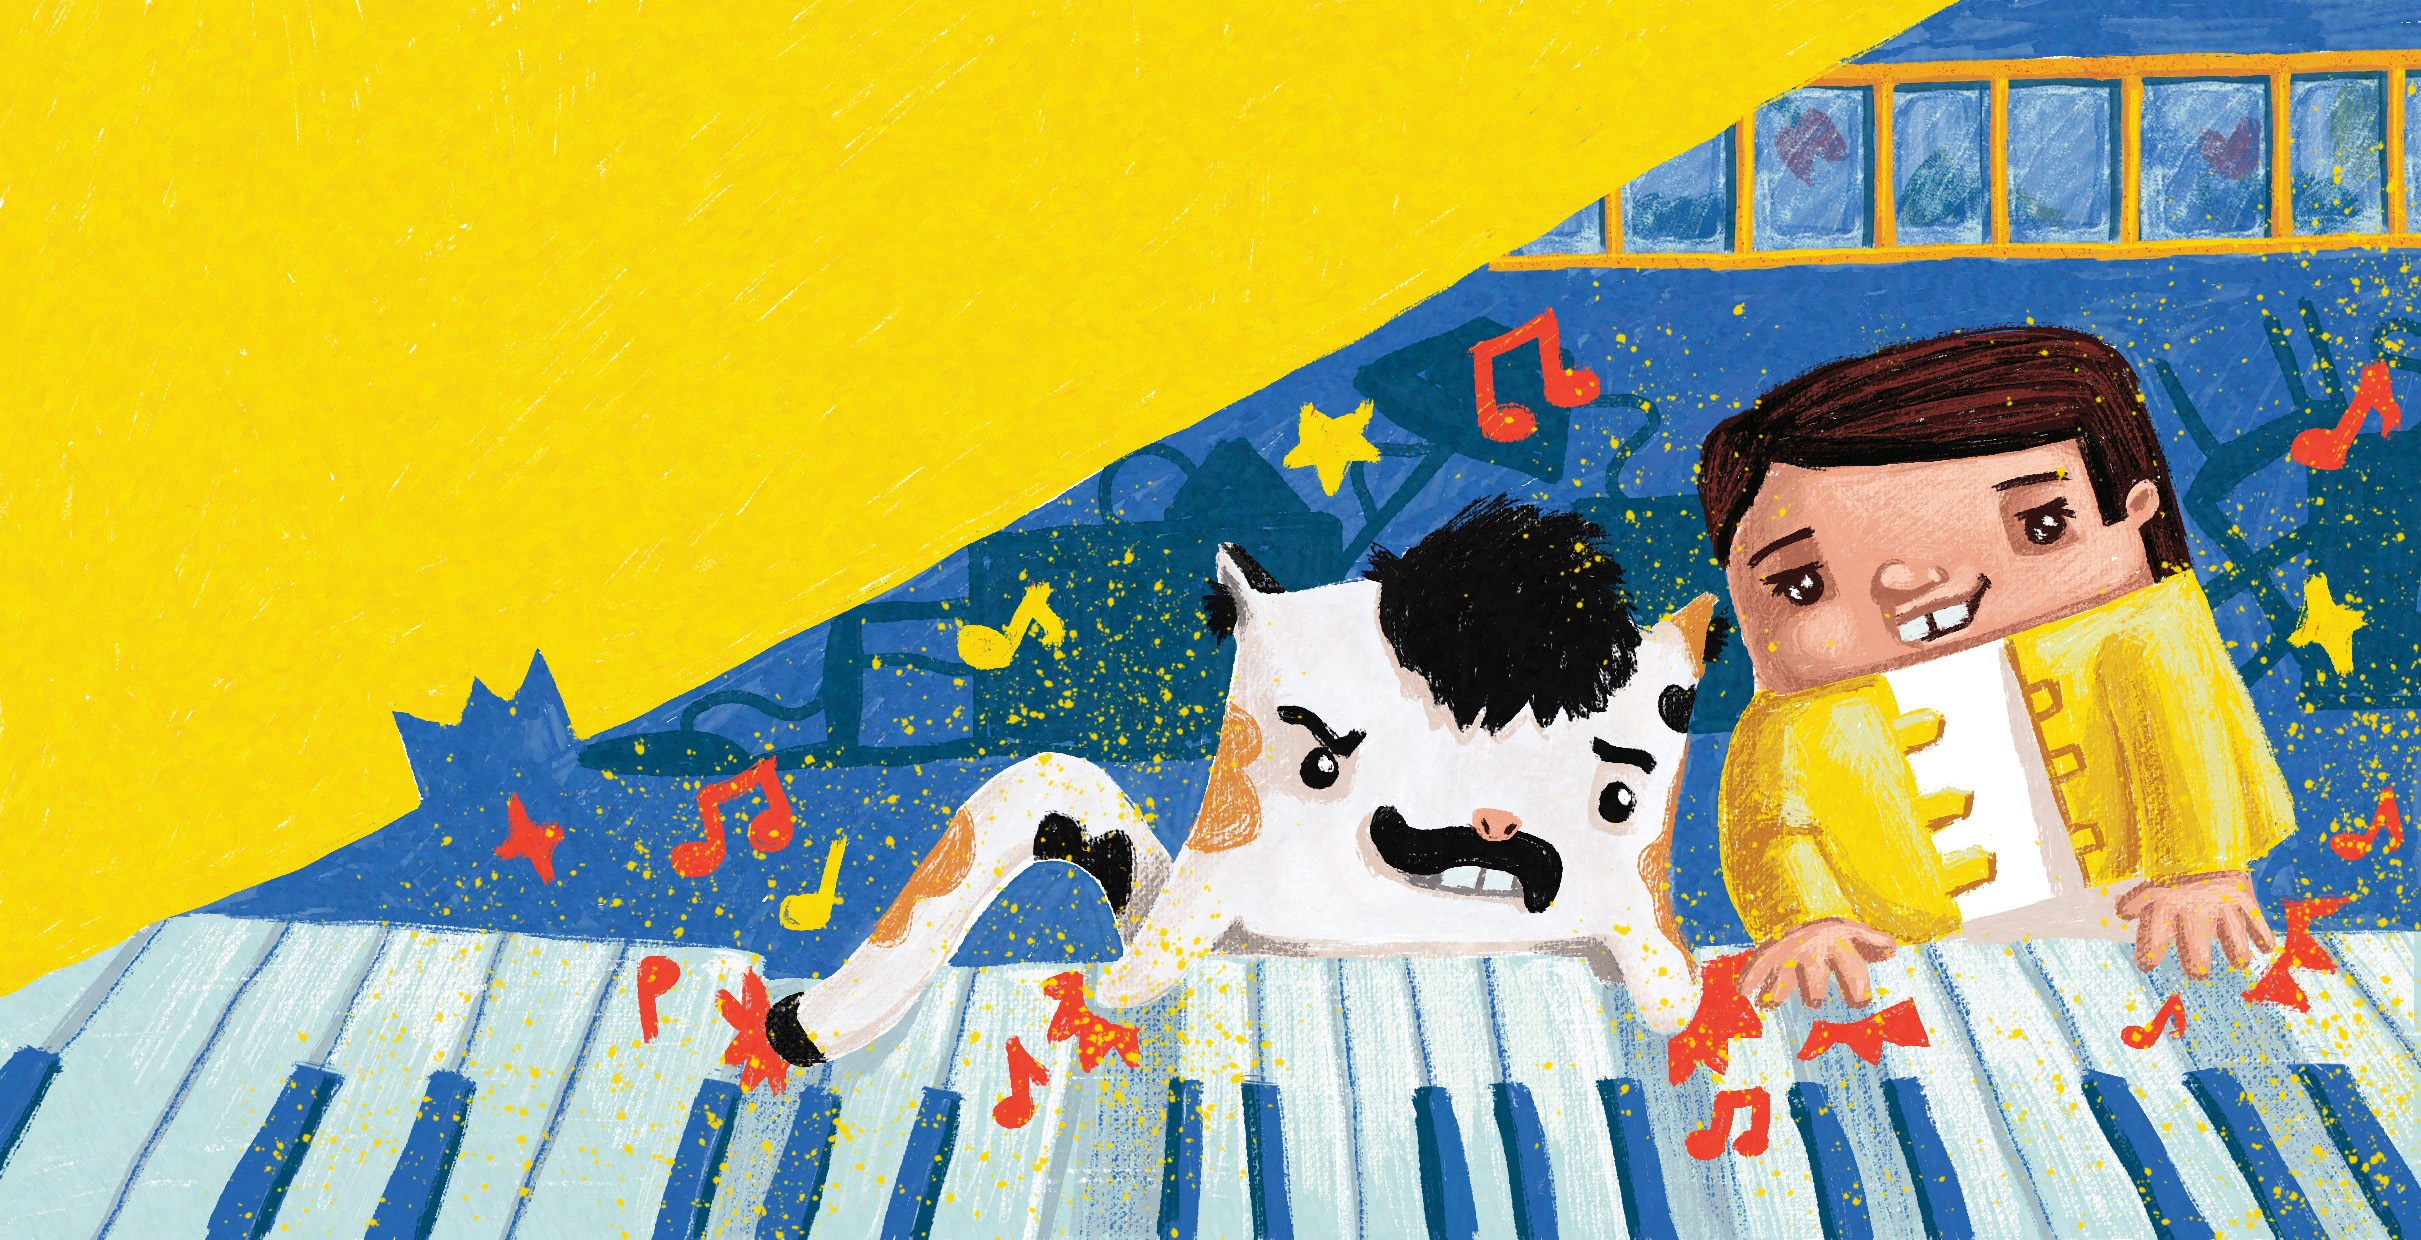 freddie mercury picture book by andra badea